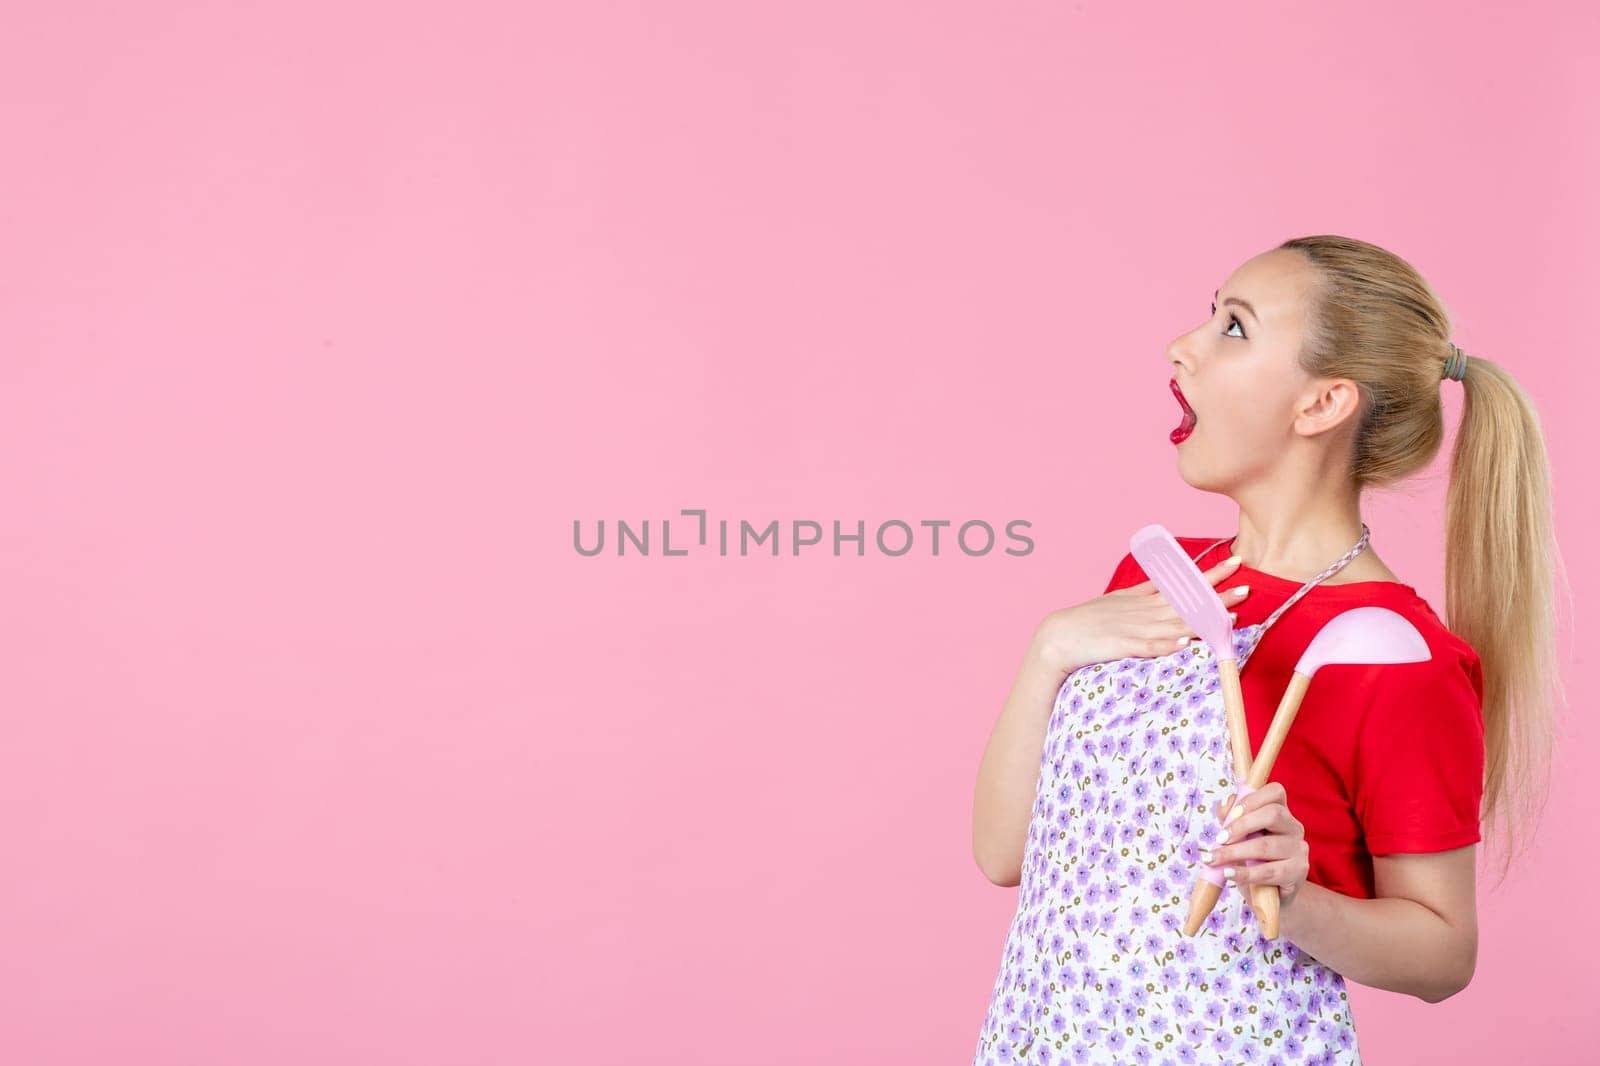 front view young housewife in cape holding spoons on pink background horizontal profession duty job worker wife uniform cutlery occupation